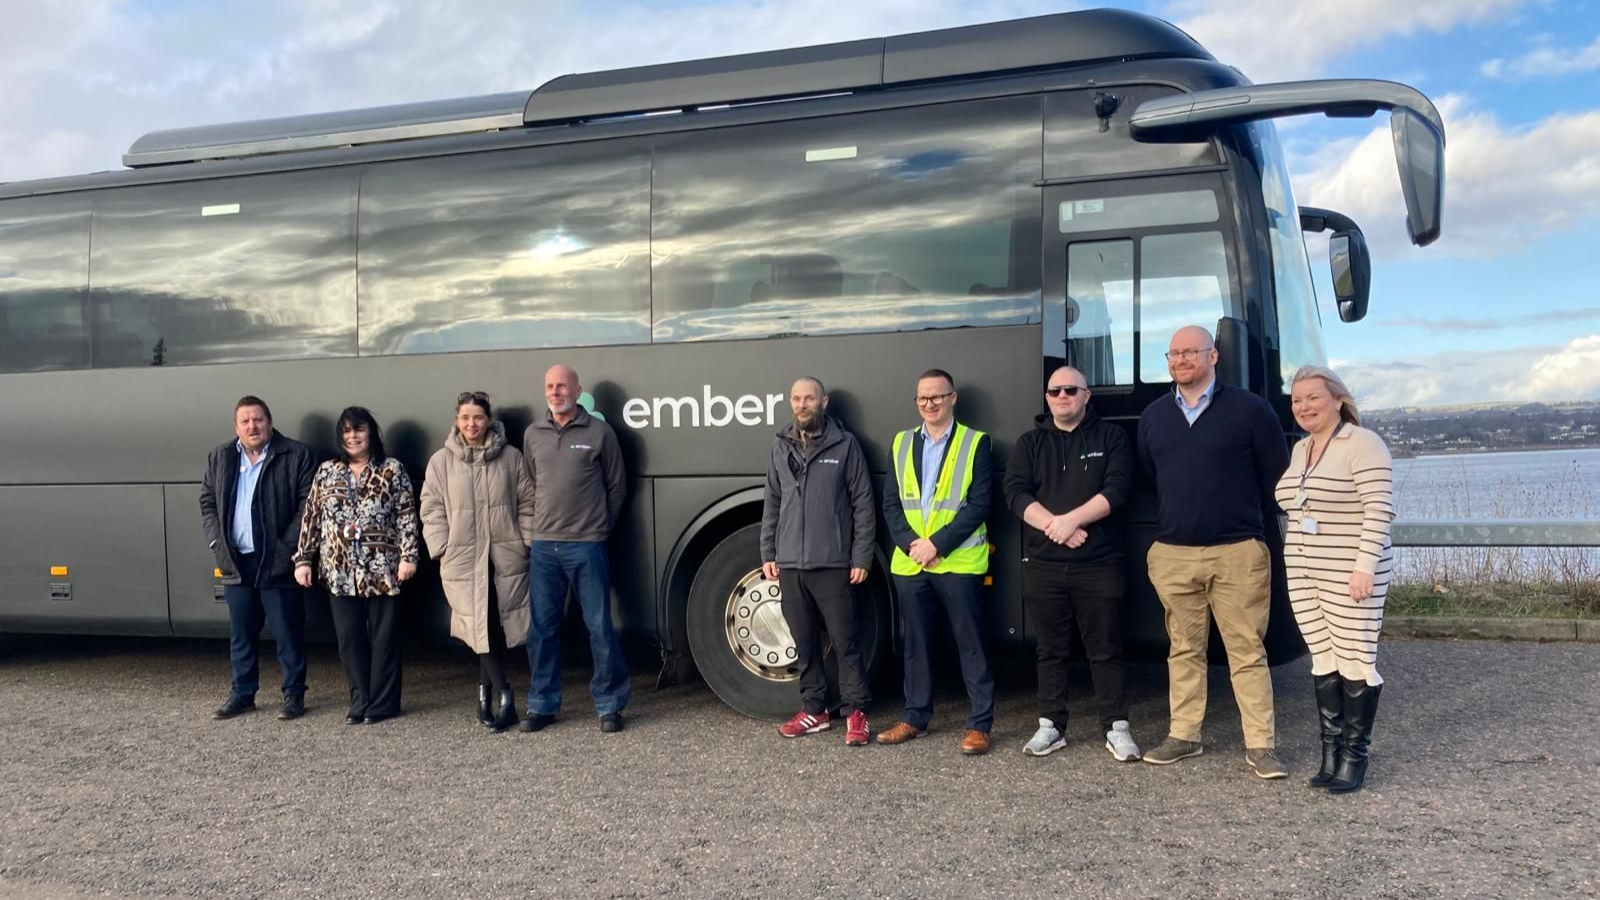 New drivers qualify in Ember’s Jobcentre scheme